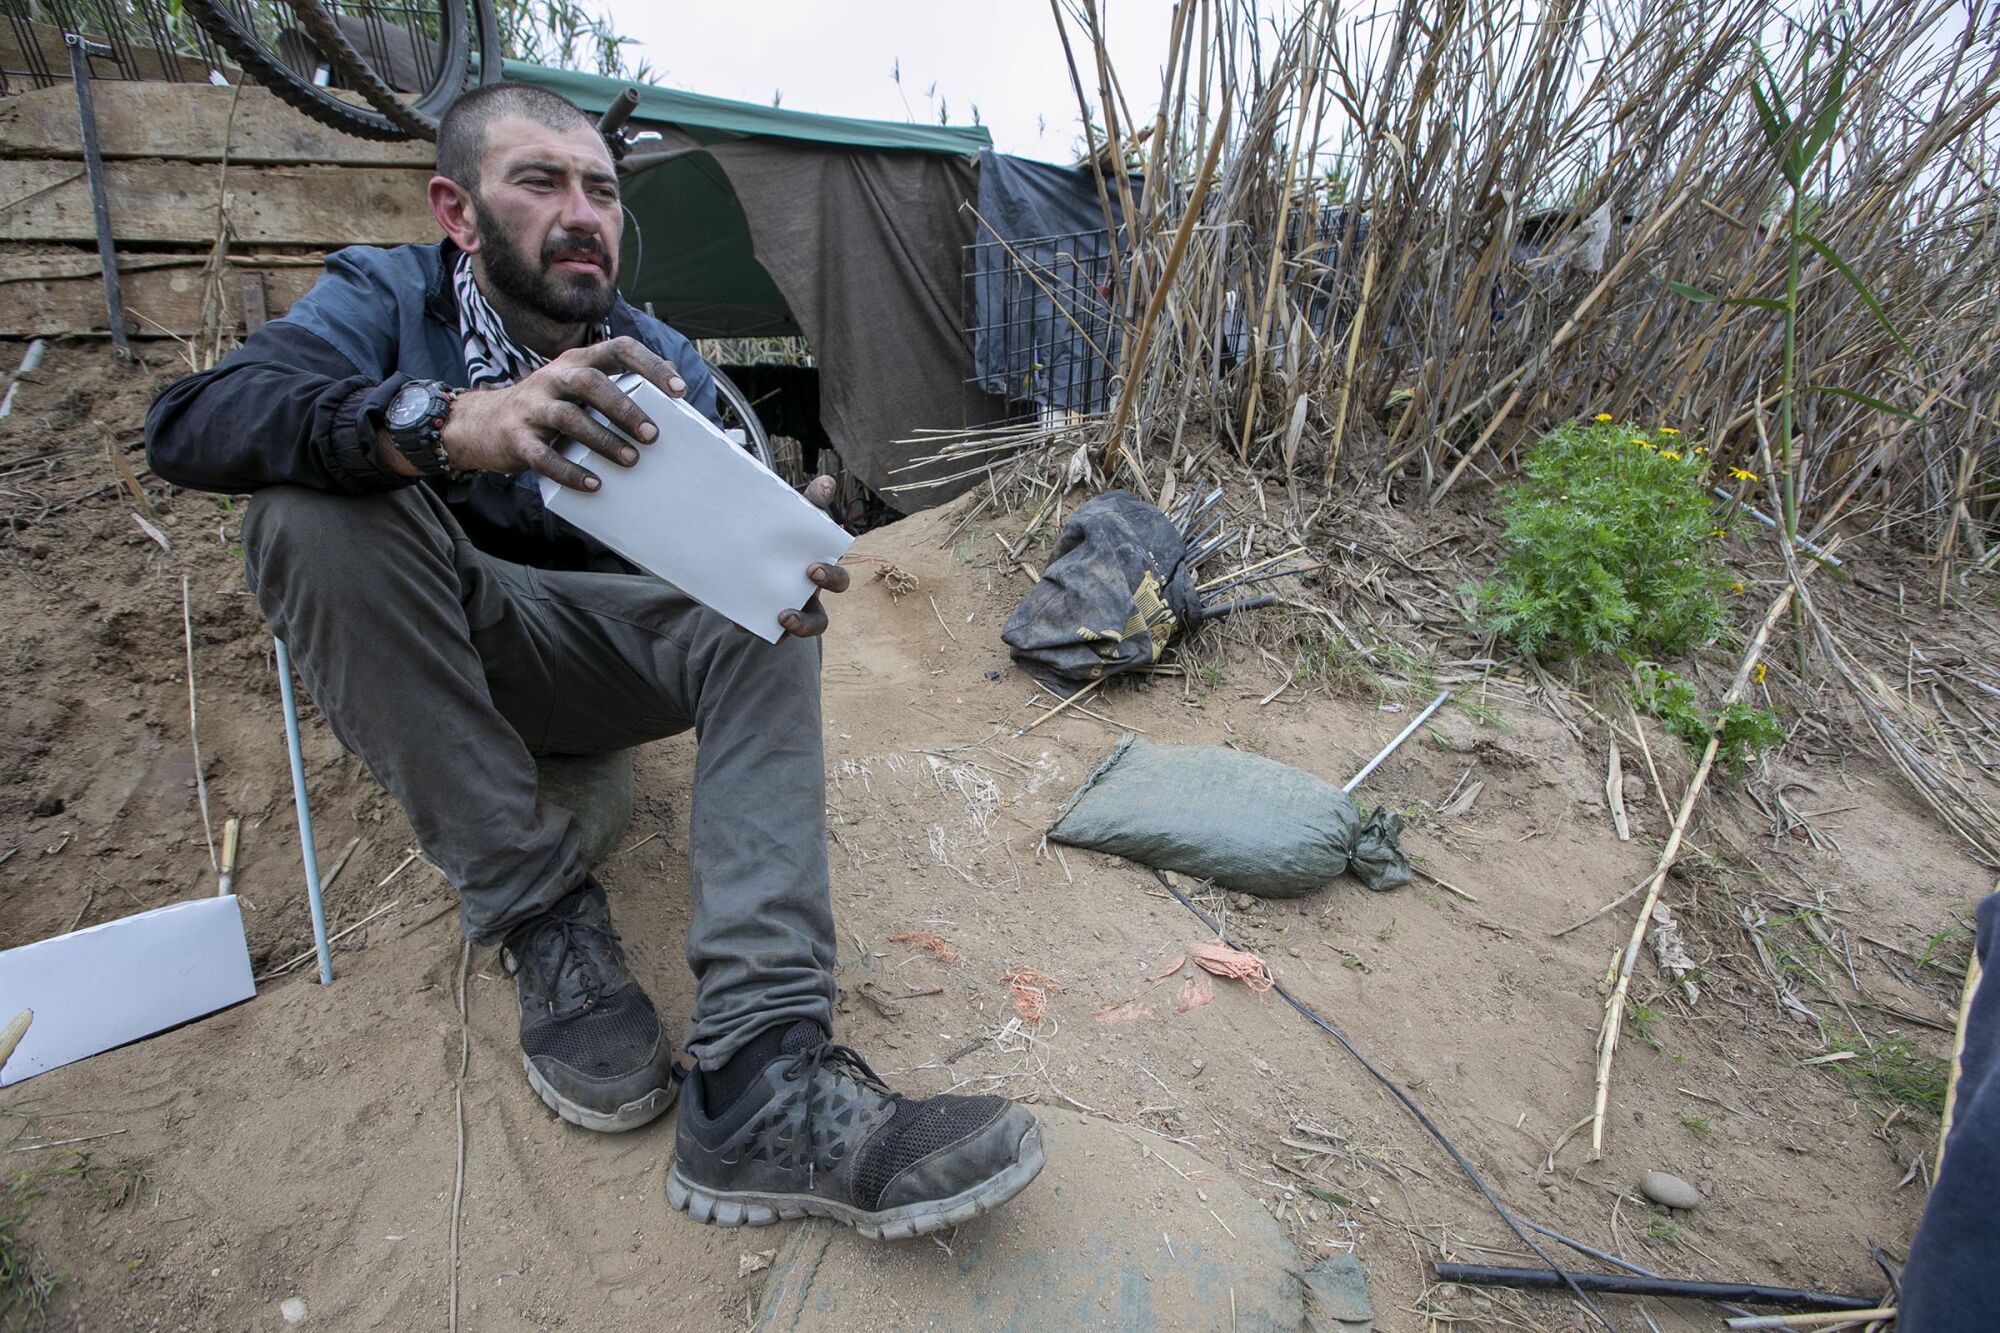 Brandon Nerz, who is experiencing homelessness and lives in "The Jungle" sat outside of his camp after getting a meal and hygiene kit from Alpha Project outreach workers Anthony Aquiningoc and Nick Healy on Thursday, April 30, 2020.